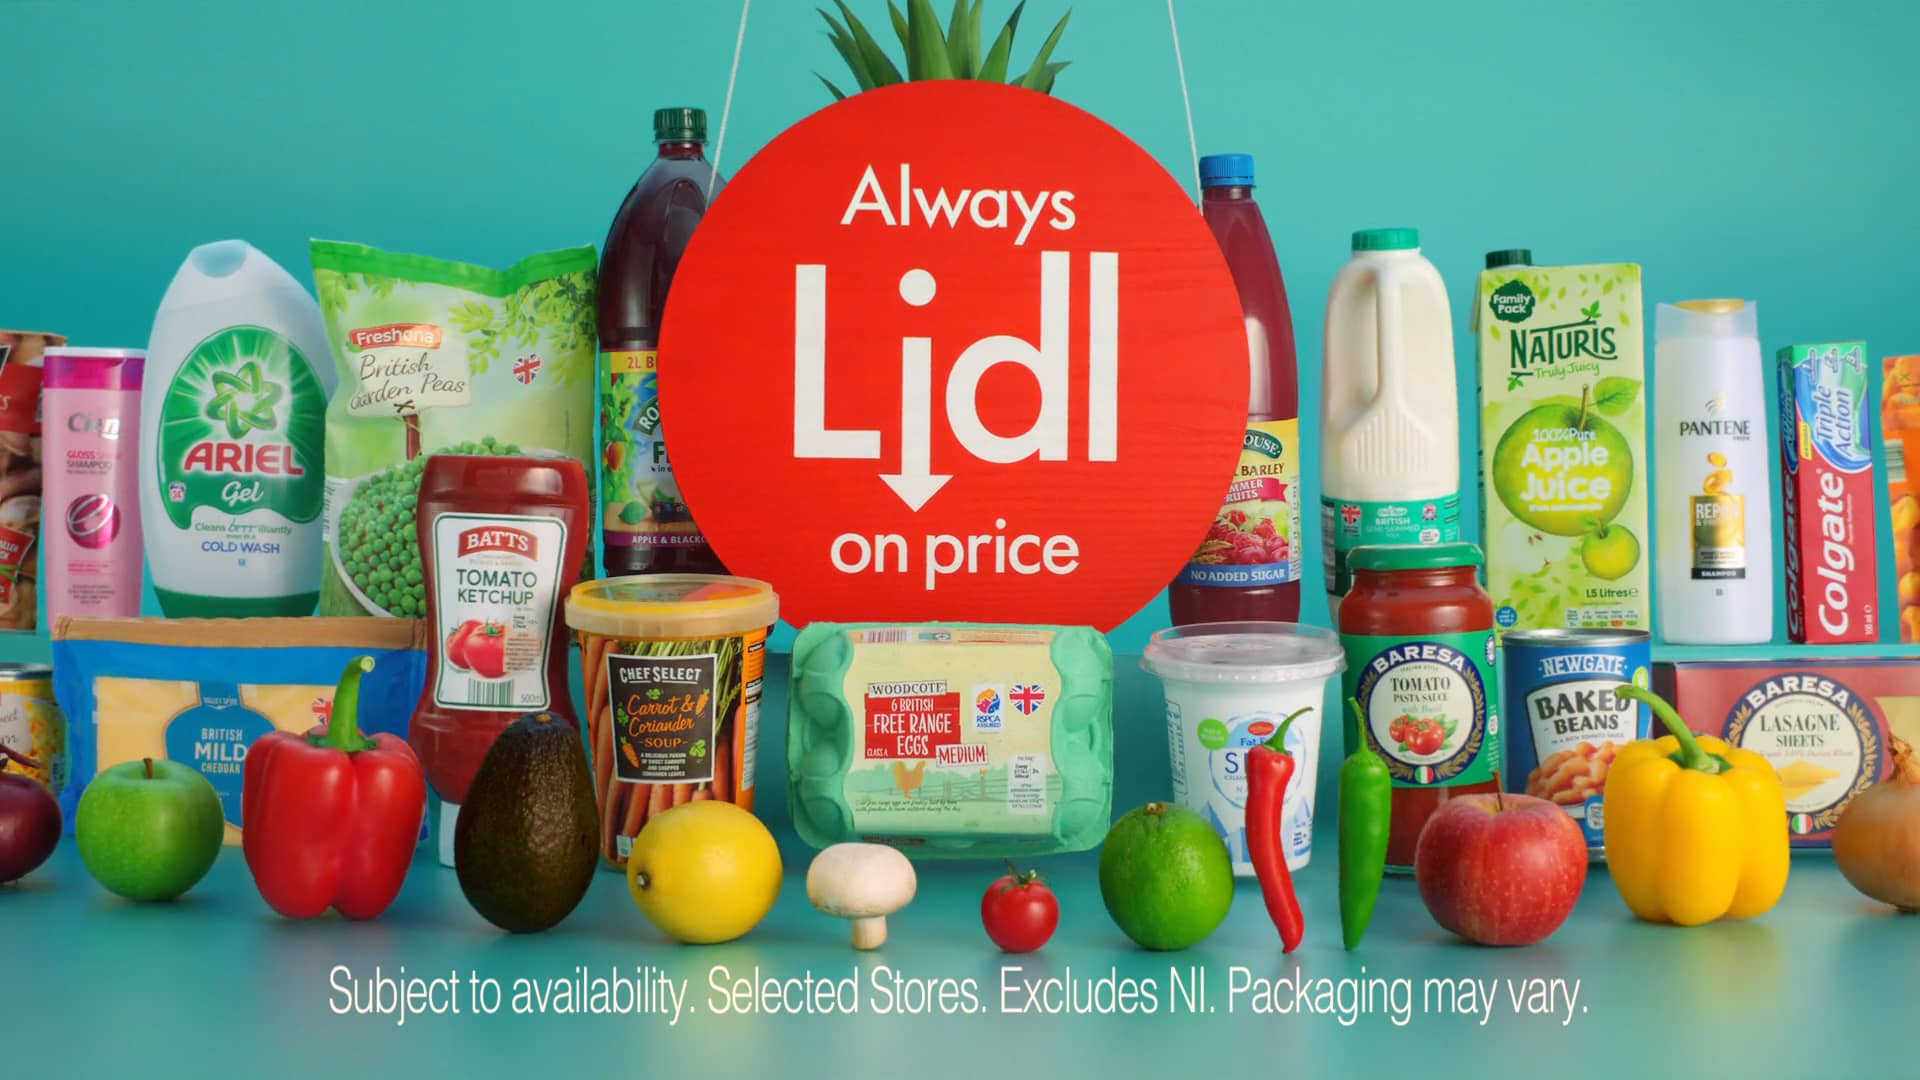 Lidl Commercial on Vimeo